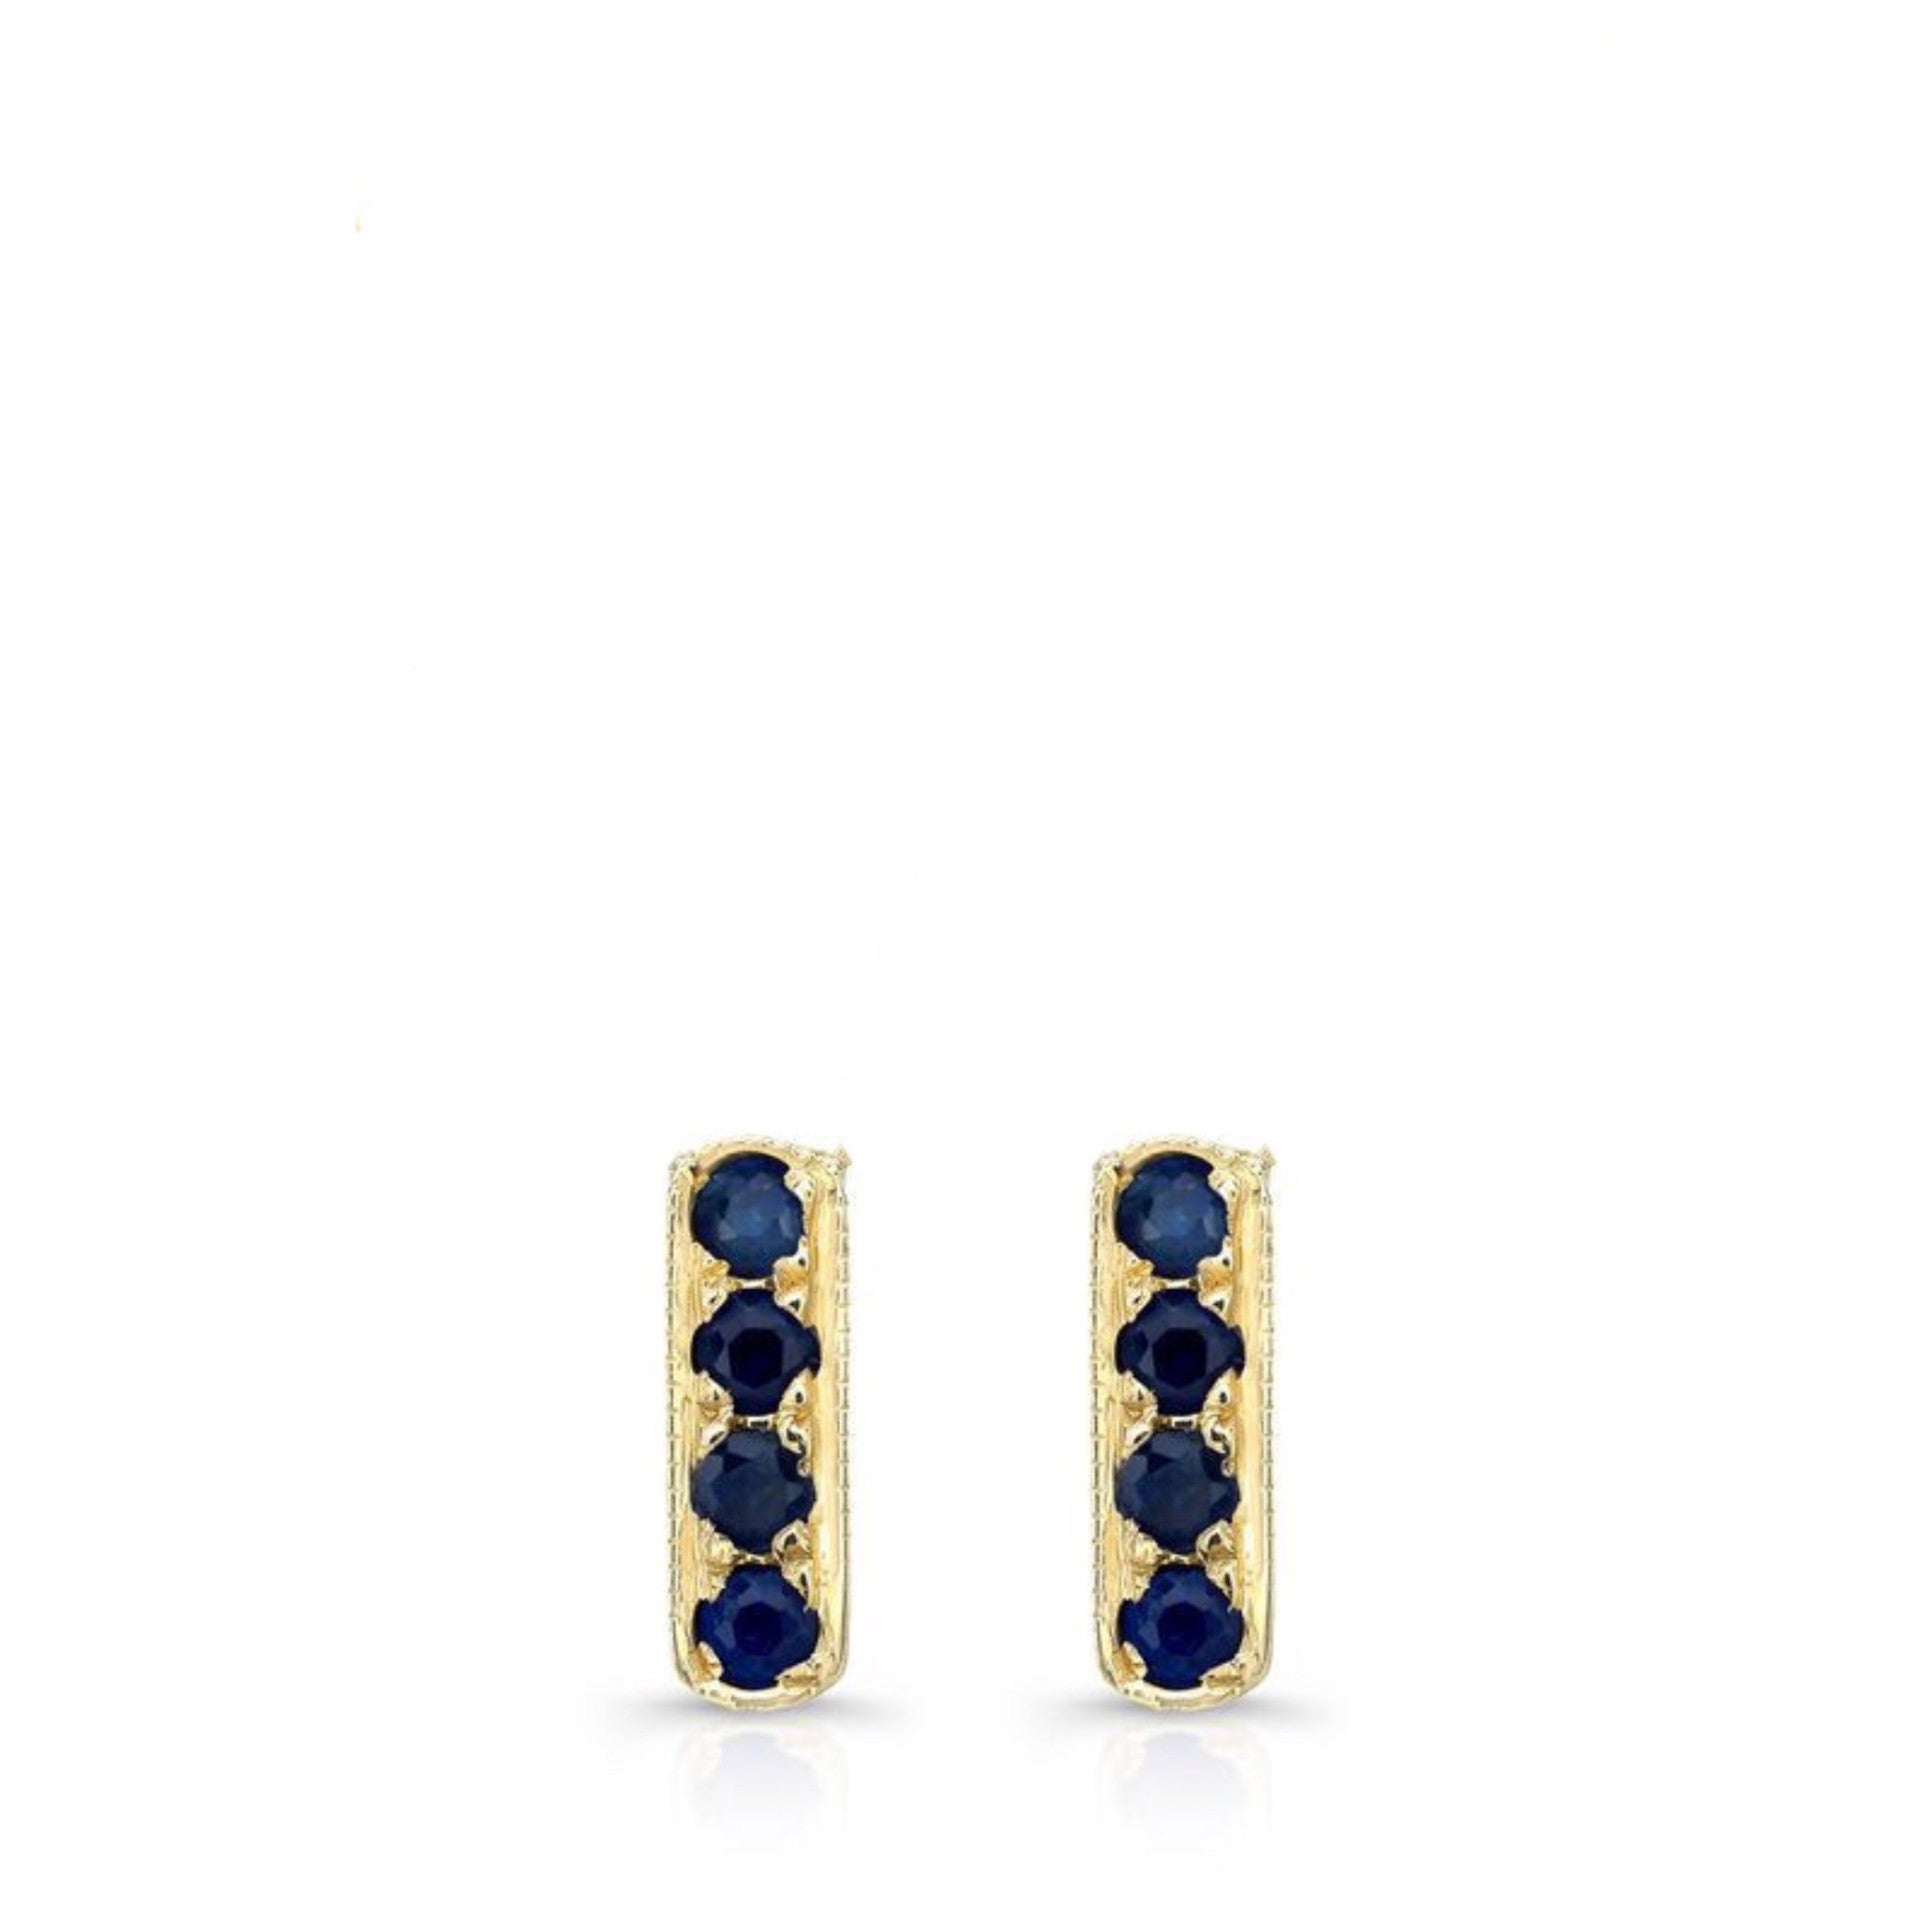 MIni Bar Studs made by hand in 18K gold and Ceylon Sapphires. Also available with other stones and in solid 18K rose, yellow and white gold. Made by hand in USA. 